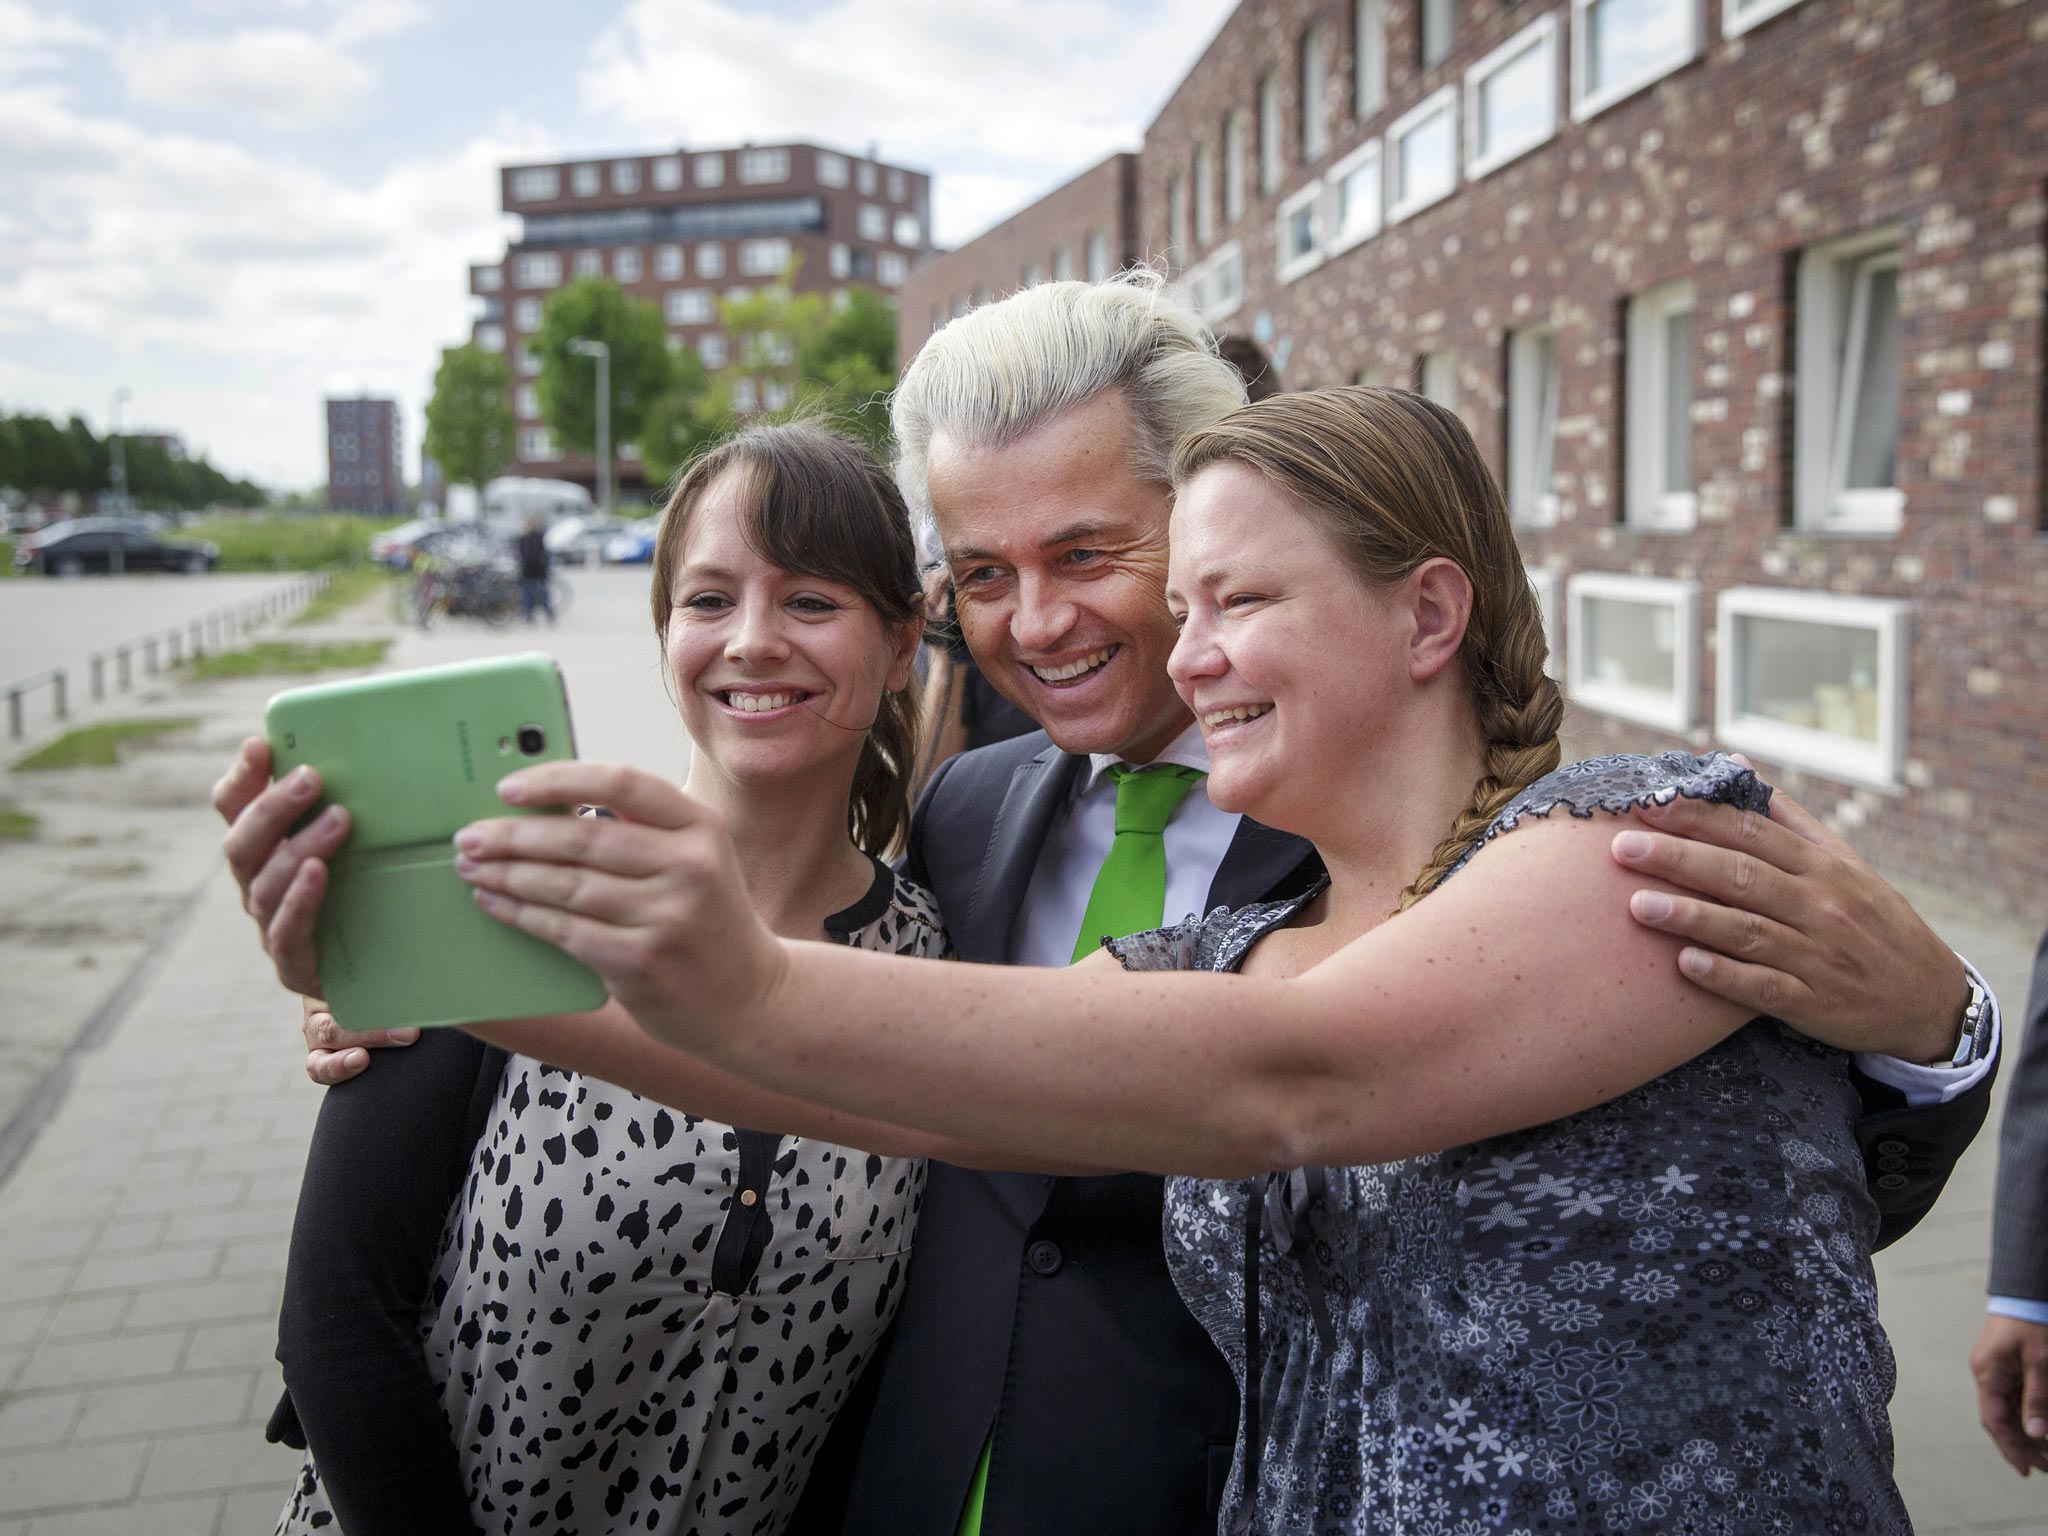 Geert Wilders, poses with supporters in The Hague